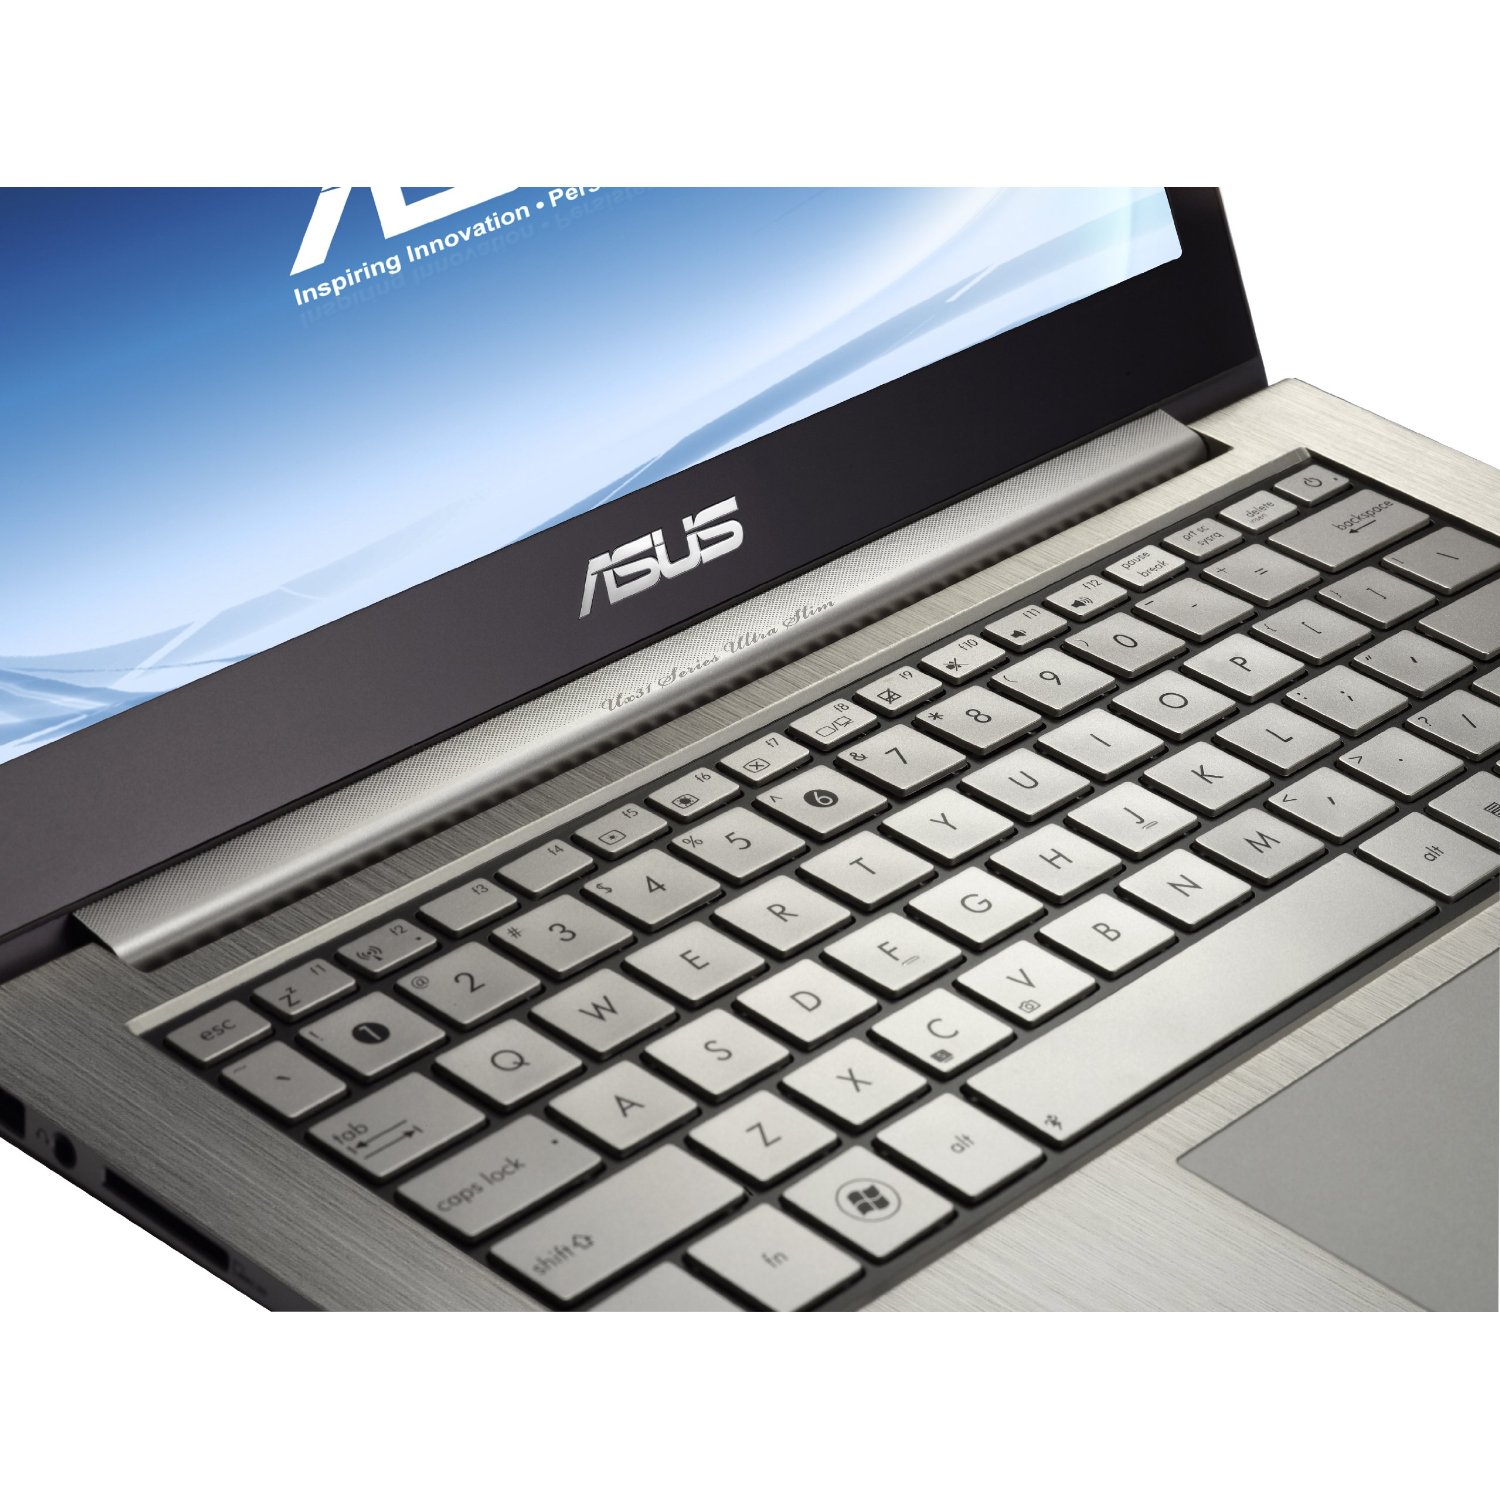 https://thetechjournal.com/wp-content/uploads/images/1111/1322100736-asus-zenbook-ux31edh72-133inch-thin-and-light-ultrabook-7.jpg